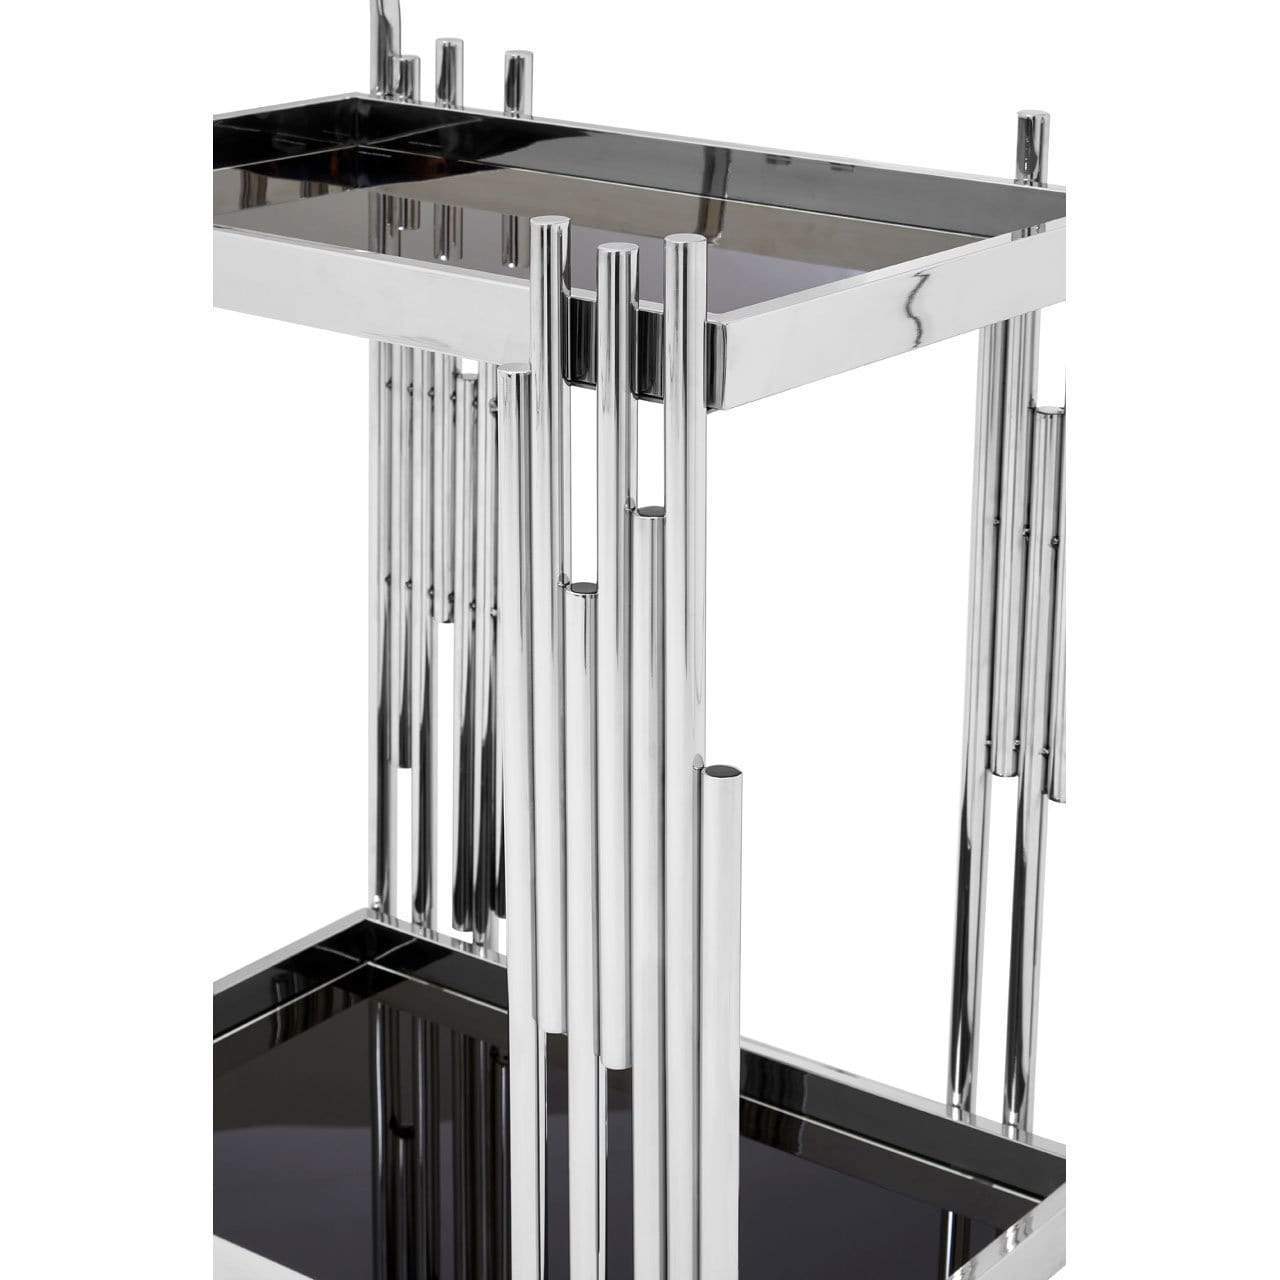 Hamilton Interiors Dining Lilto 2 Tier Trolley with Silver Finish Frame House of Isabella UK